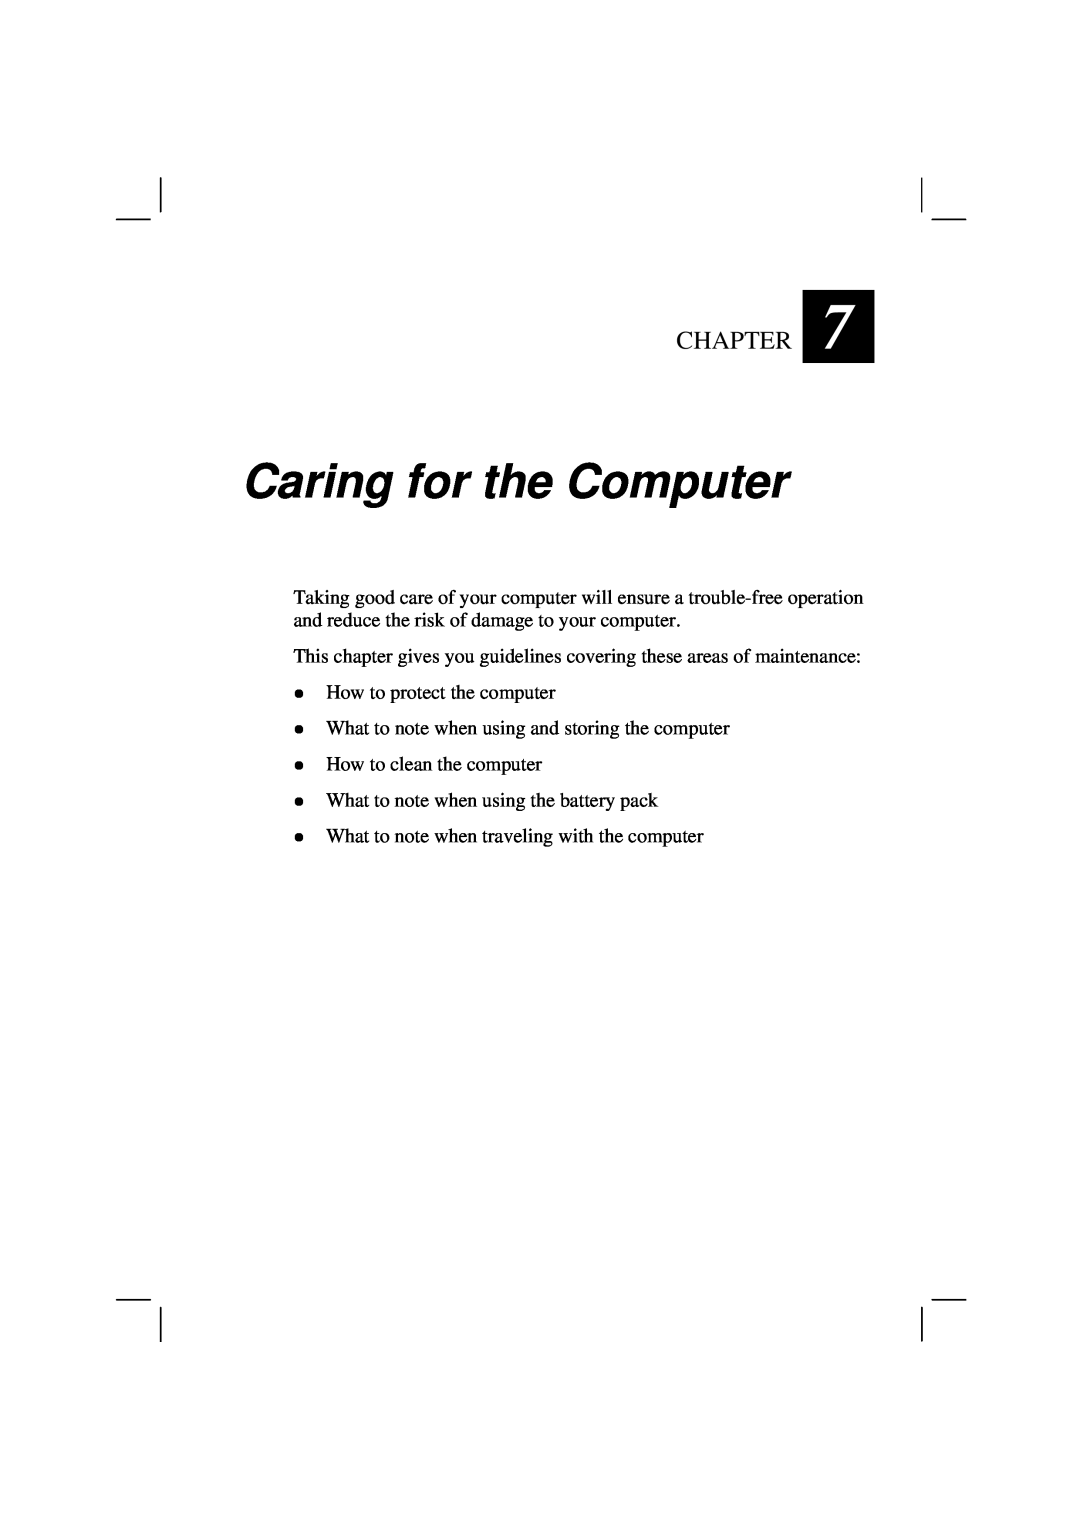 Casio HK1223 owner manual Caring for the Computer, Chapter 